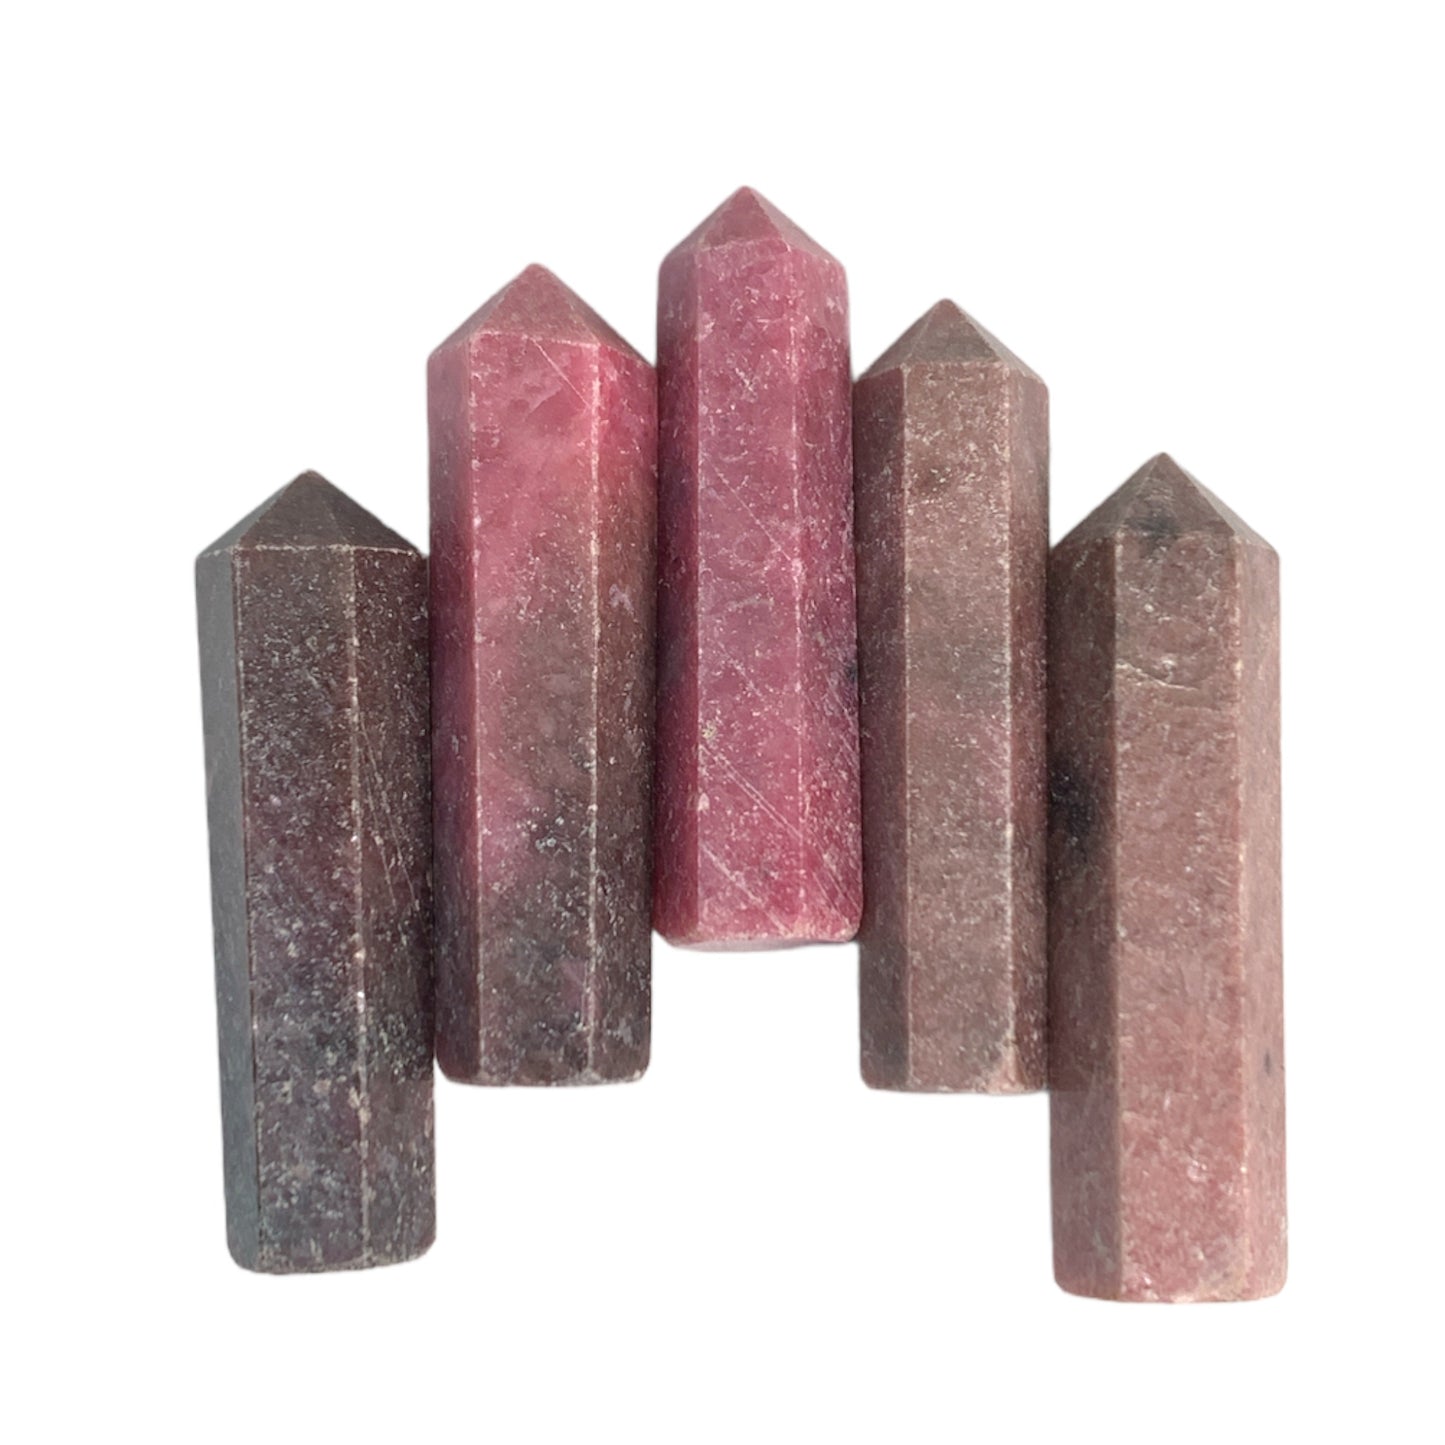 Rhodonite - 35-40mm - Single Terminated Pencil Points (retail purchase as singles, wholesale min order 5) - NEW1221 - India